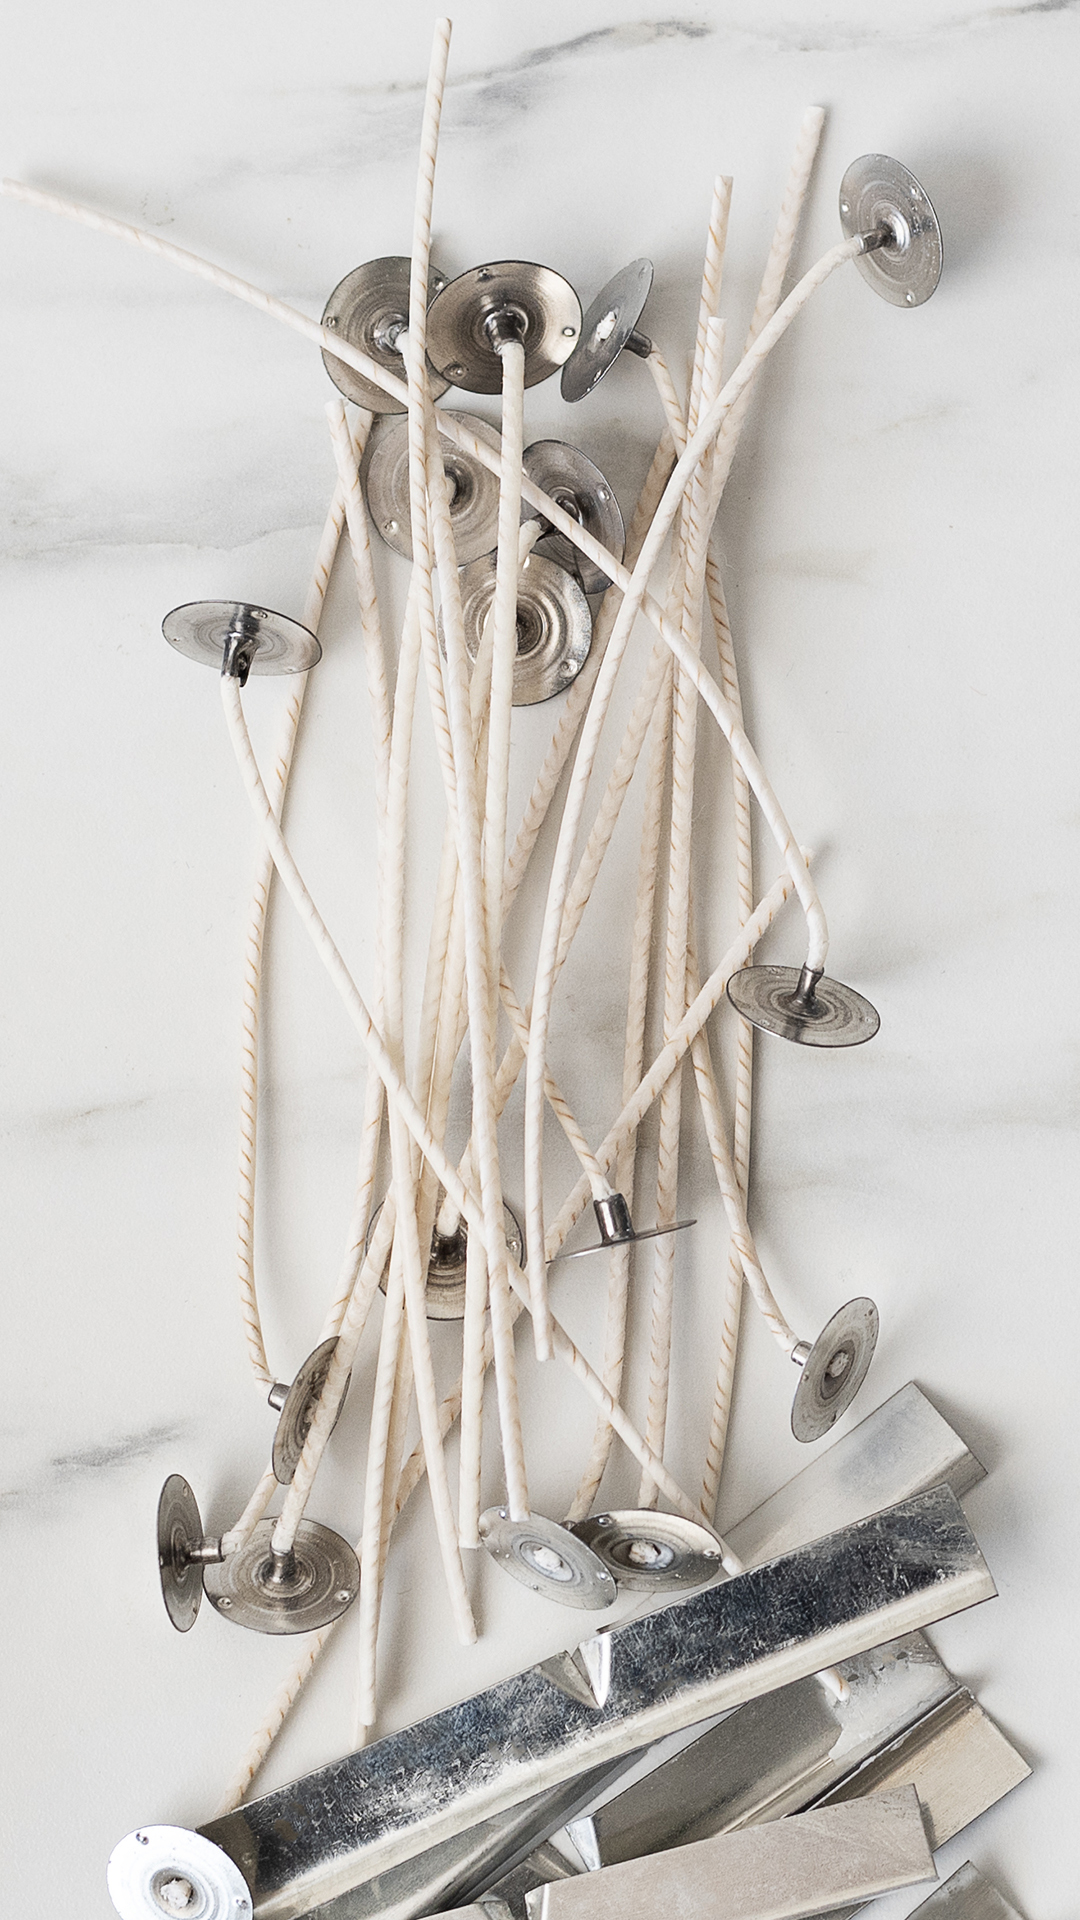 Groupings of pretabbled cotton candle wicks and silver-colored metal wick bars on a marble background